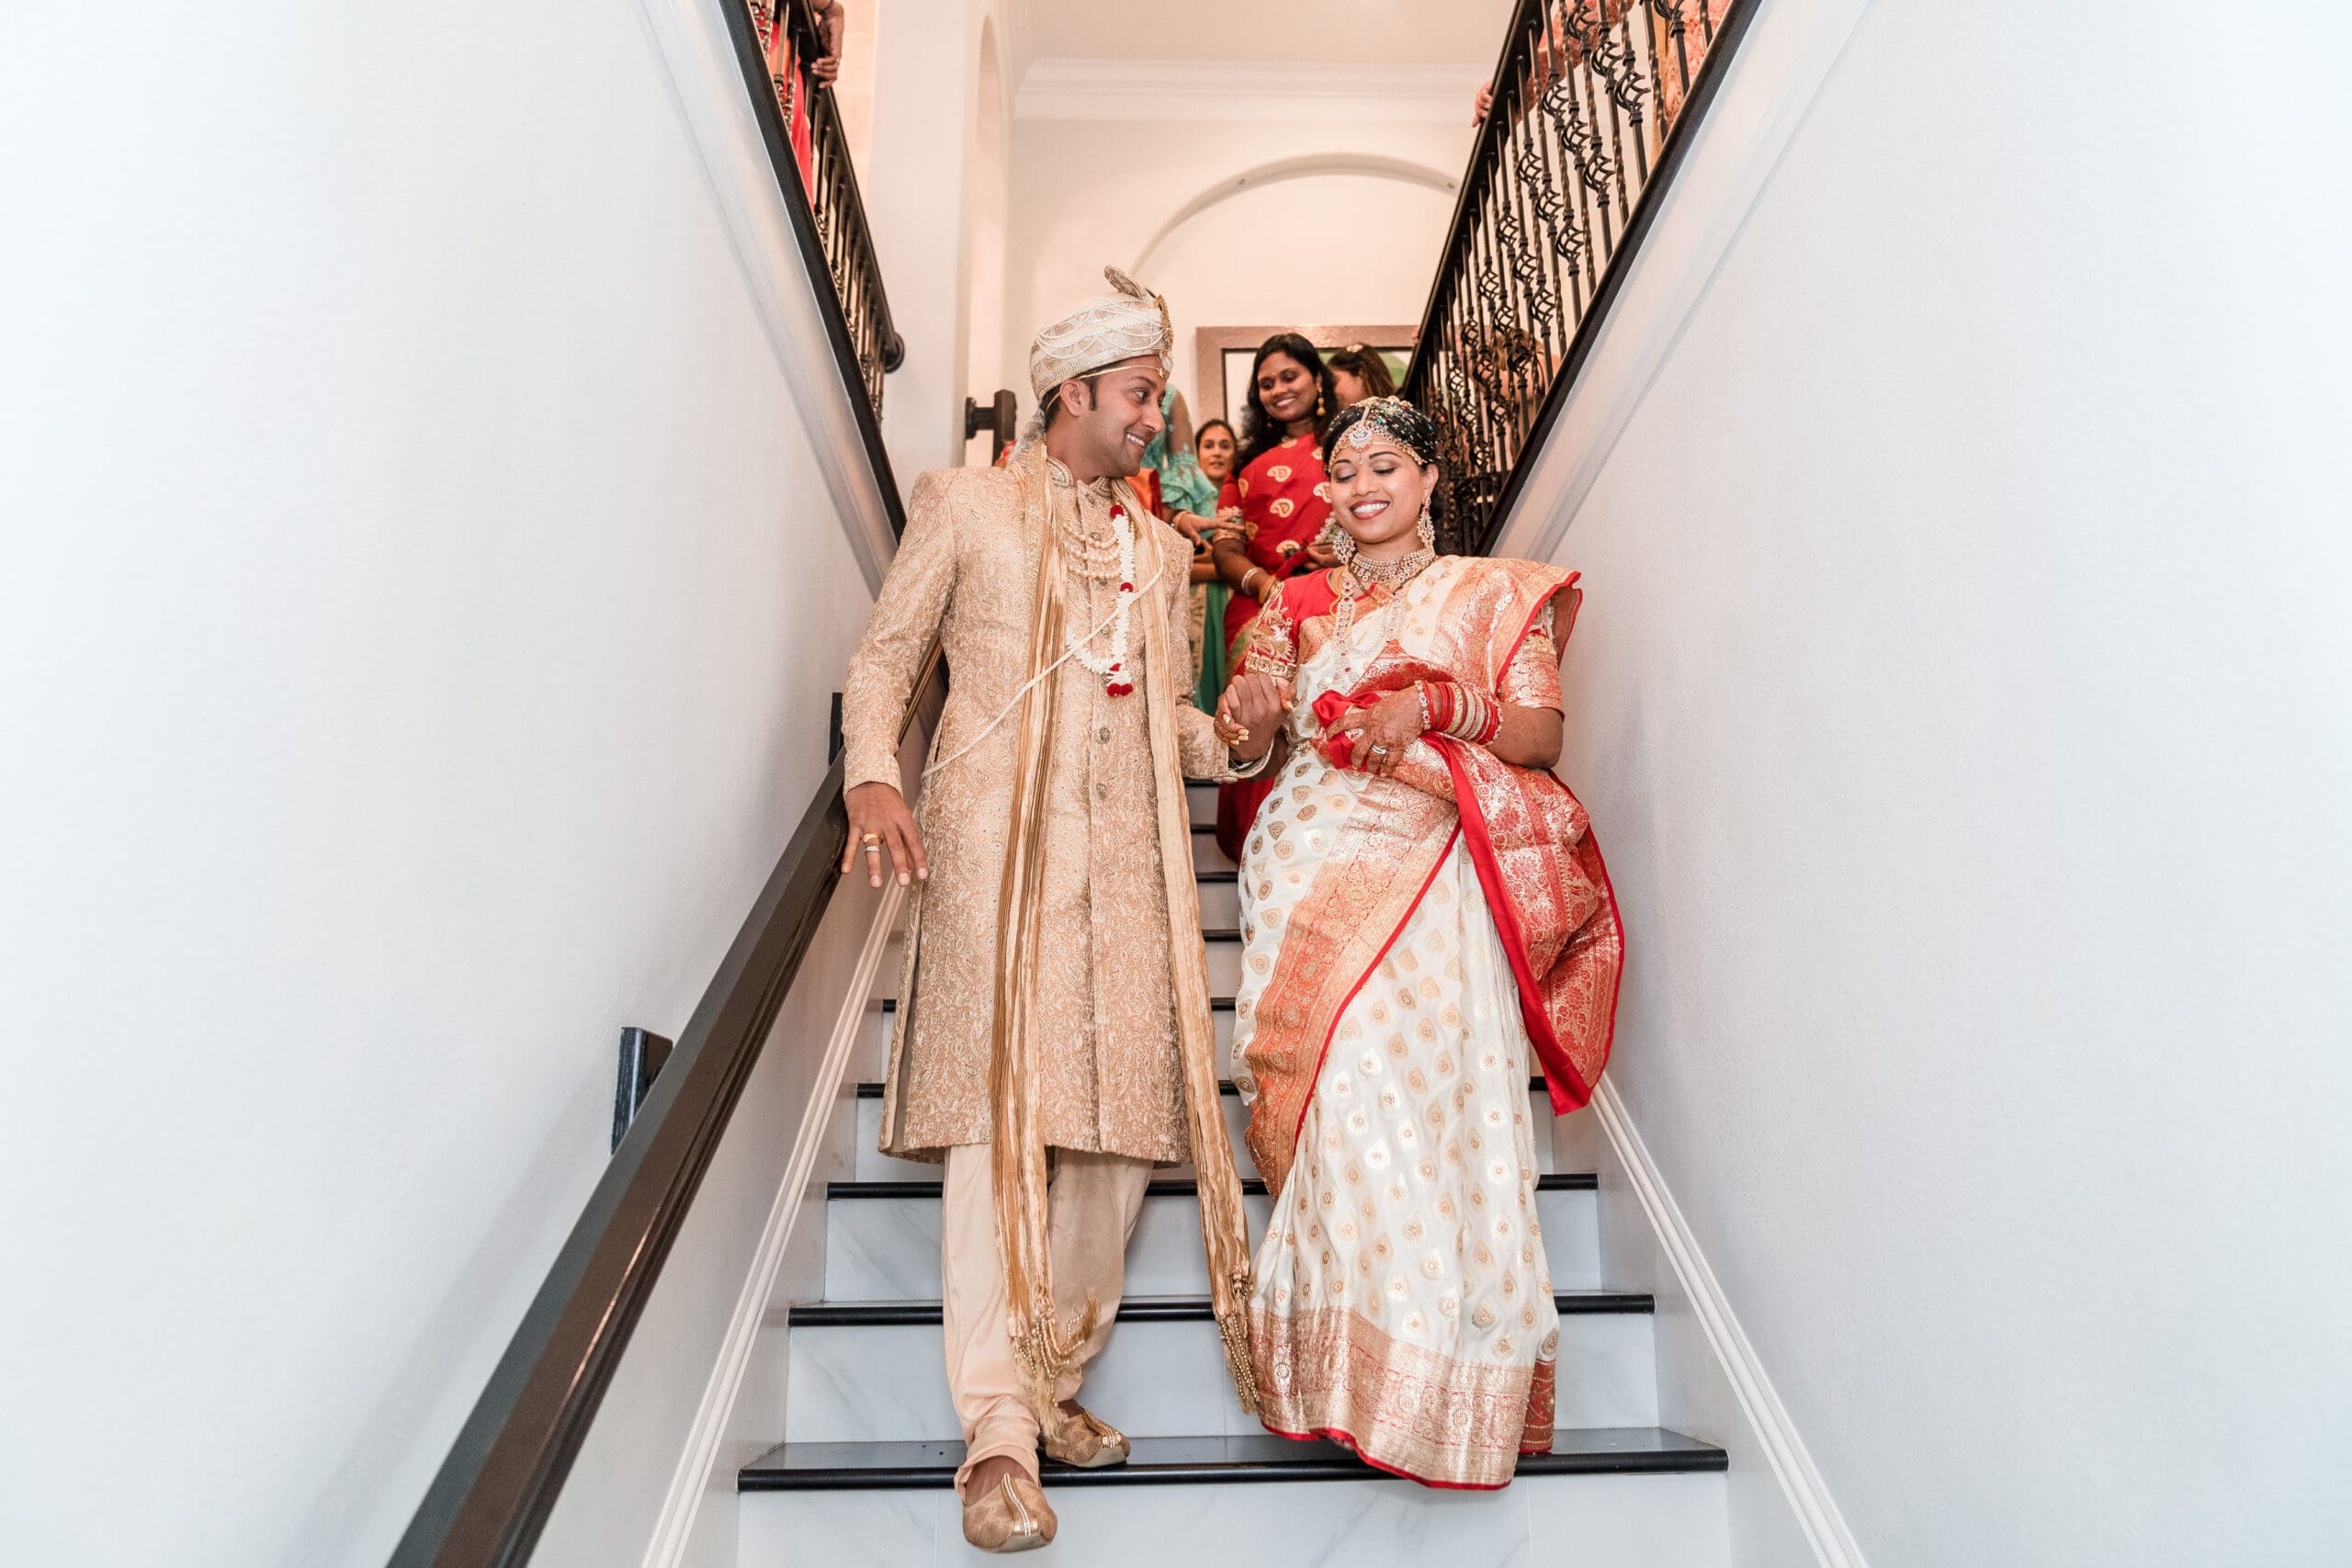 Joyful couple in traditional Indian attire holding hands while walking down stairs - cultural wedding photography